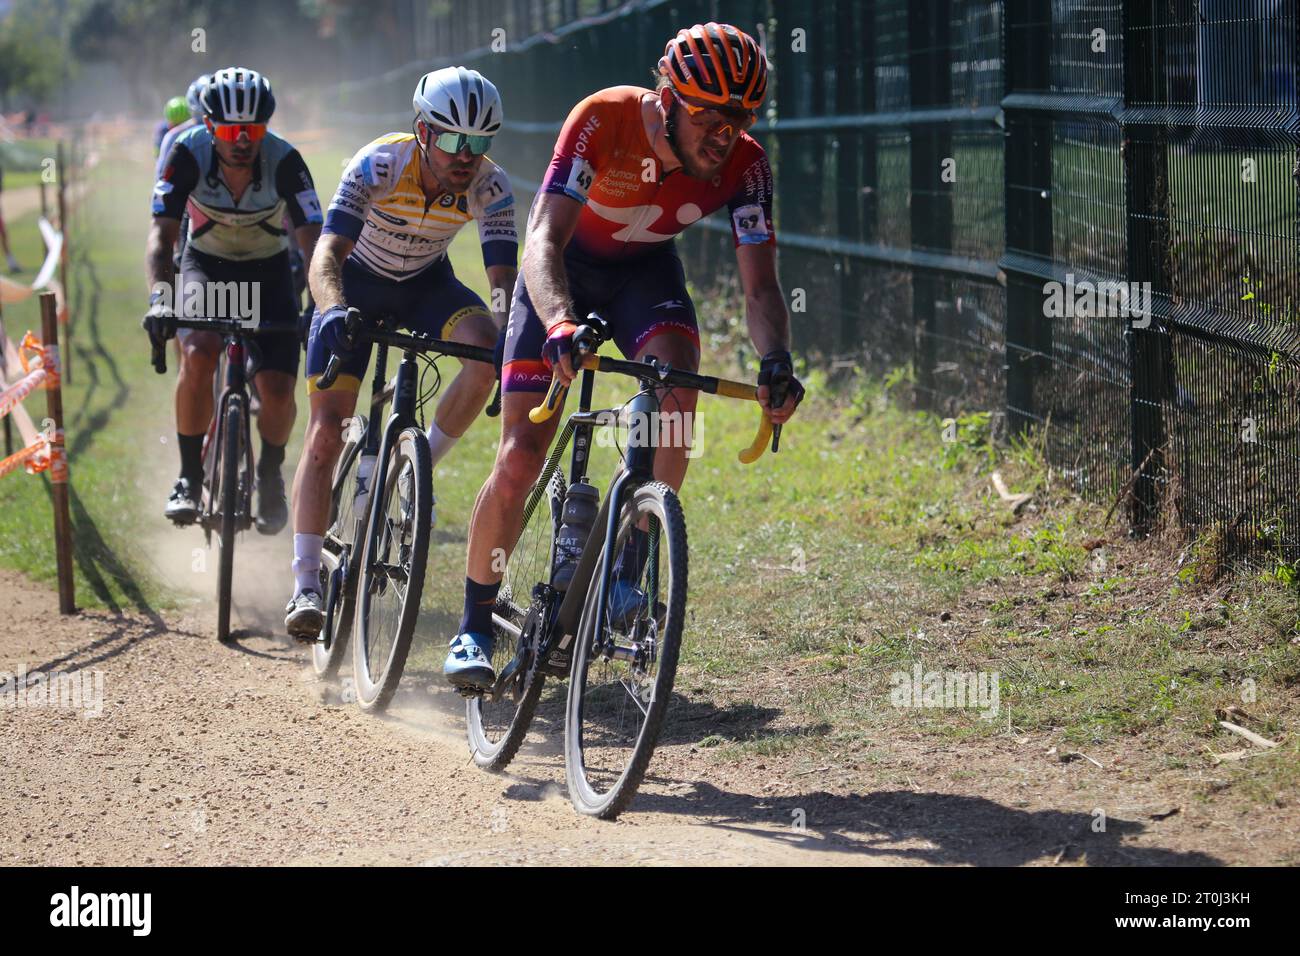 Pontevedra, Spain, October 7th, 2023: The cyclist, Gage Hecht (49, R) leads a group during the men's elite test of the Gran Premio Cidade de Pontevedra 2023, on October 7, 2023, in Pontevedra, Spain. Credit: Alberto Brevers / Alamy Live News. Stock Photo